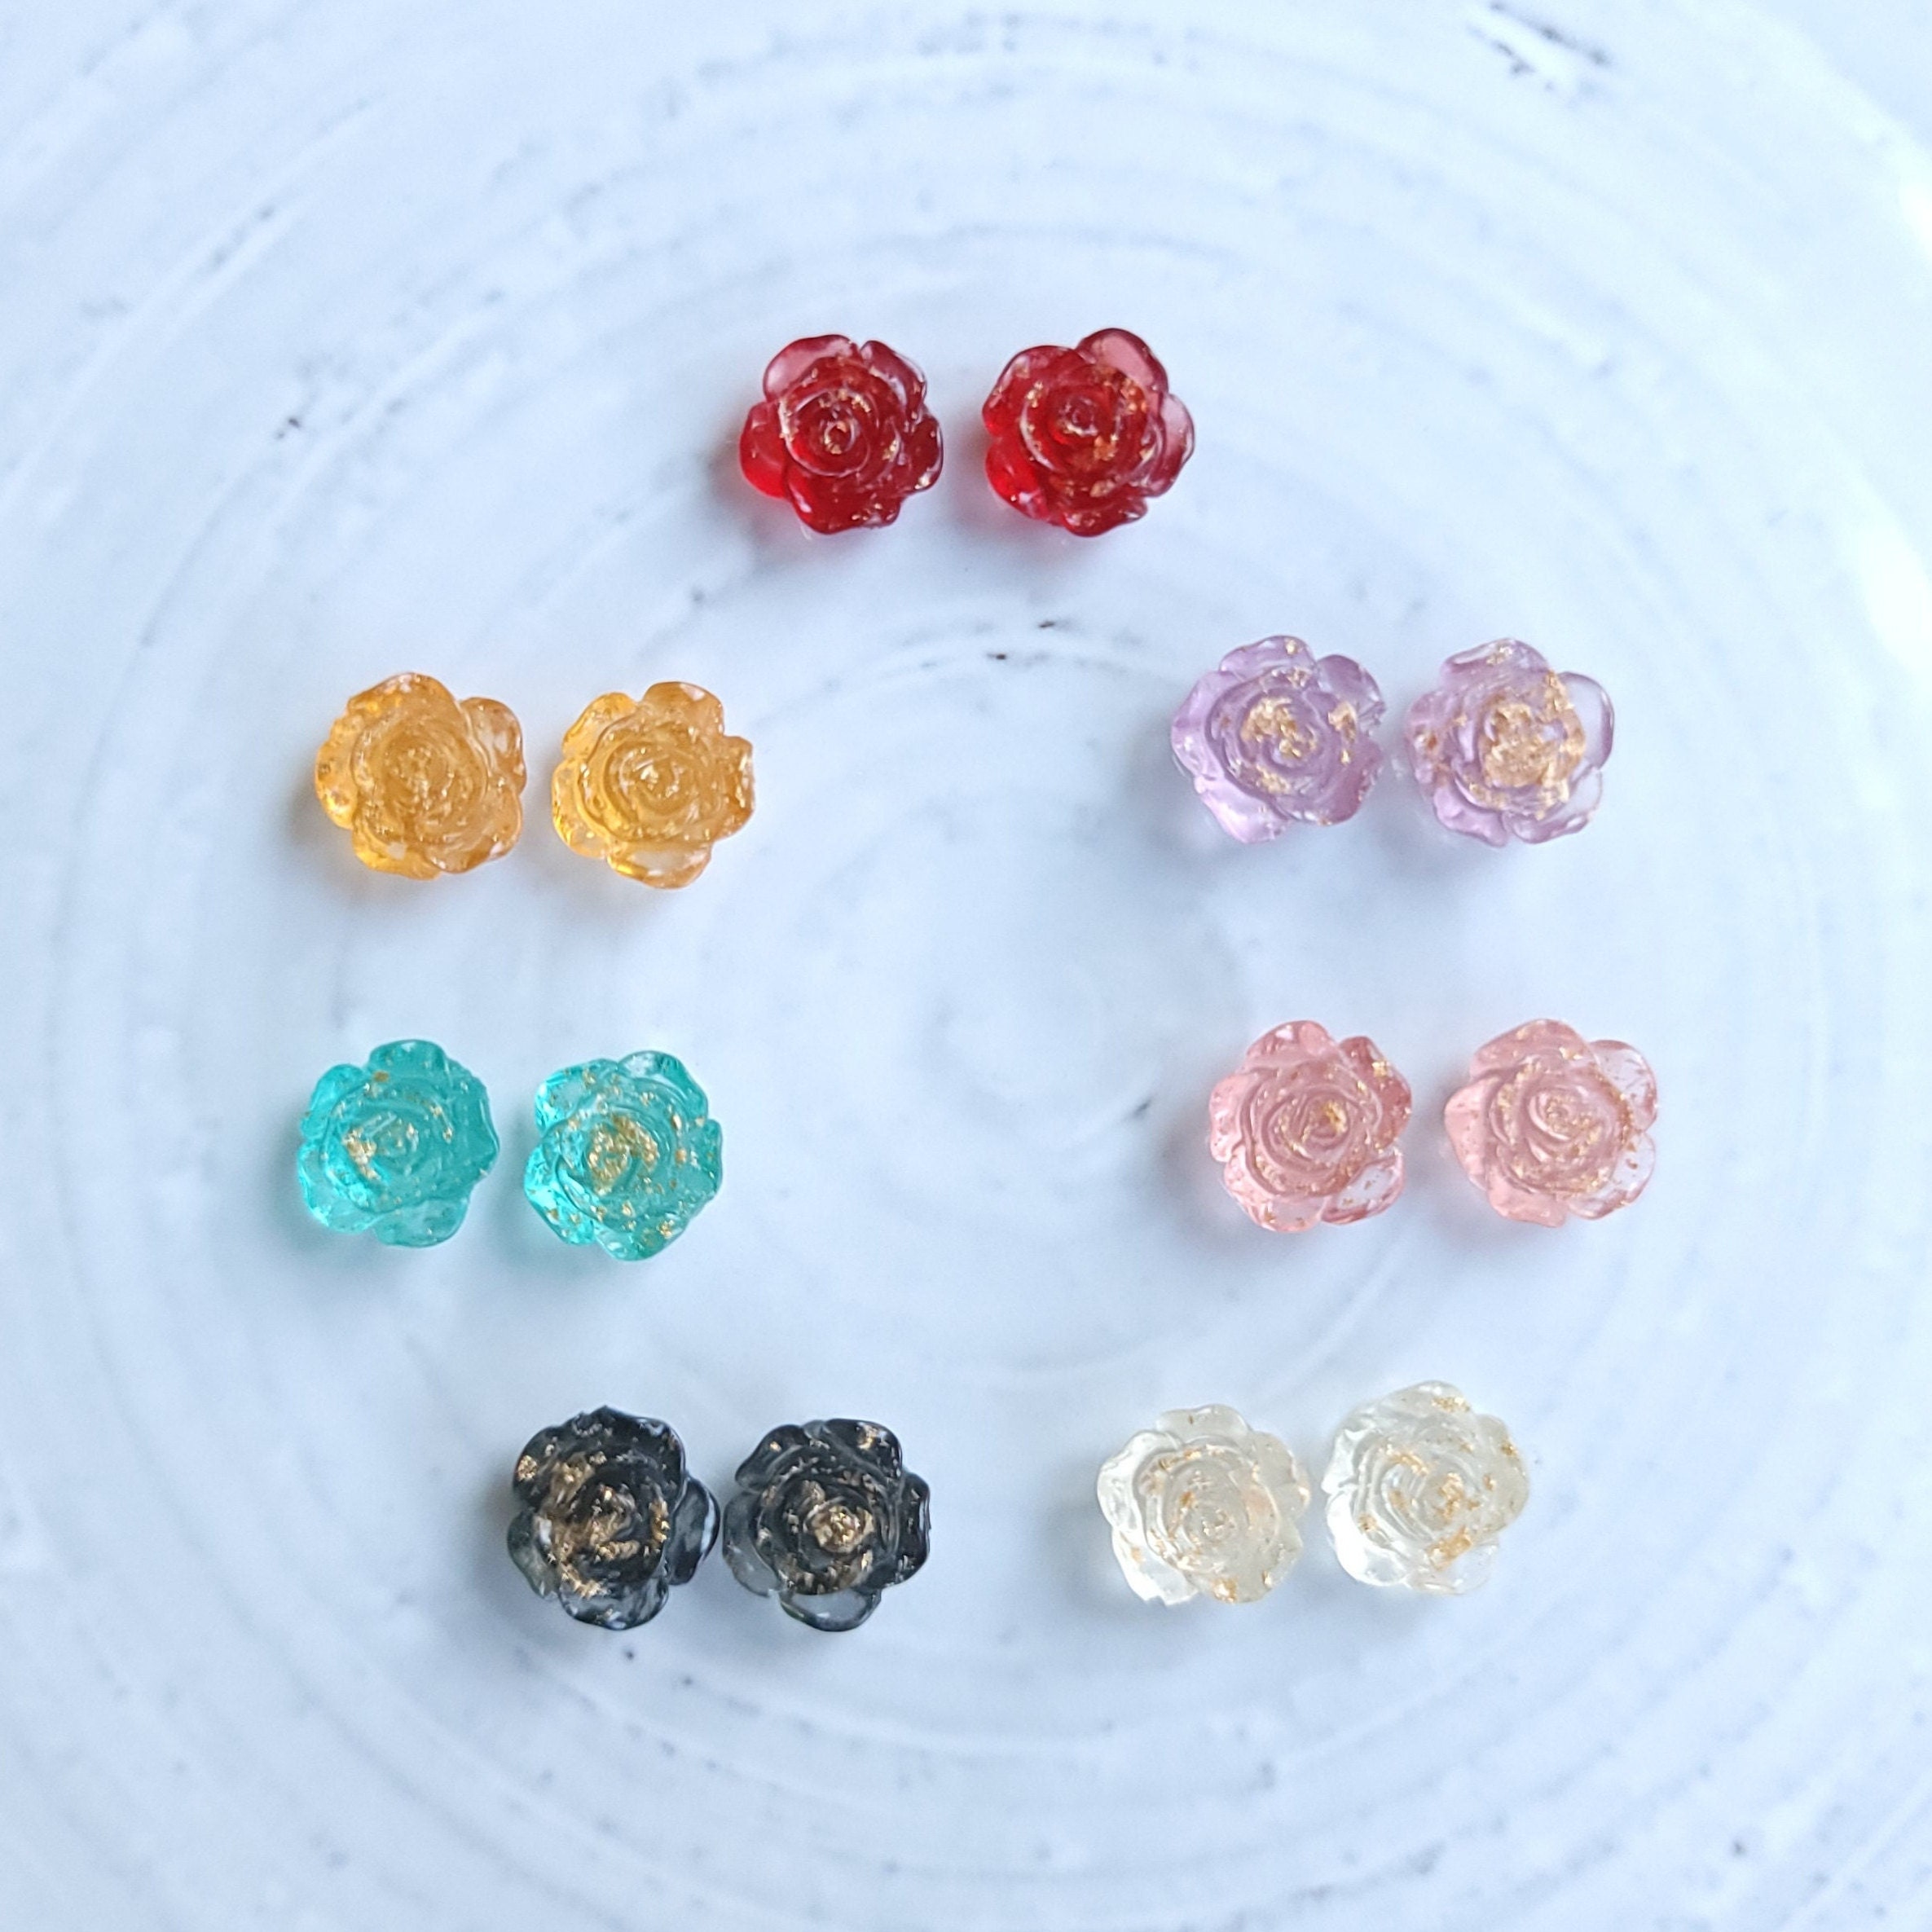 Clear Plastic Stud Earrings, Hypo allergenic studs, Earring Trays 12x5mm,  Transparent In Colour, With Silicone Back 100/250pcs